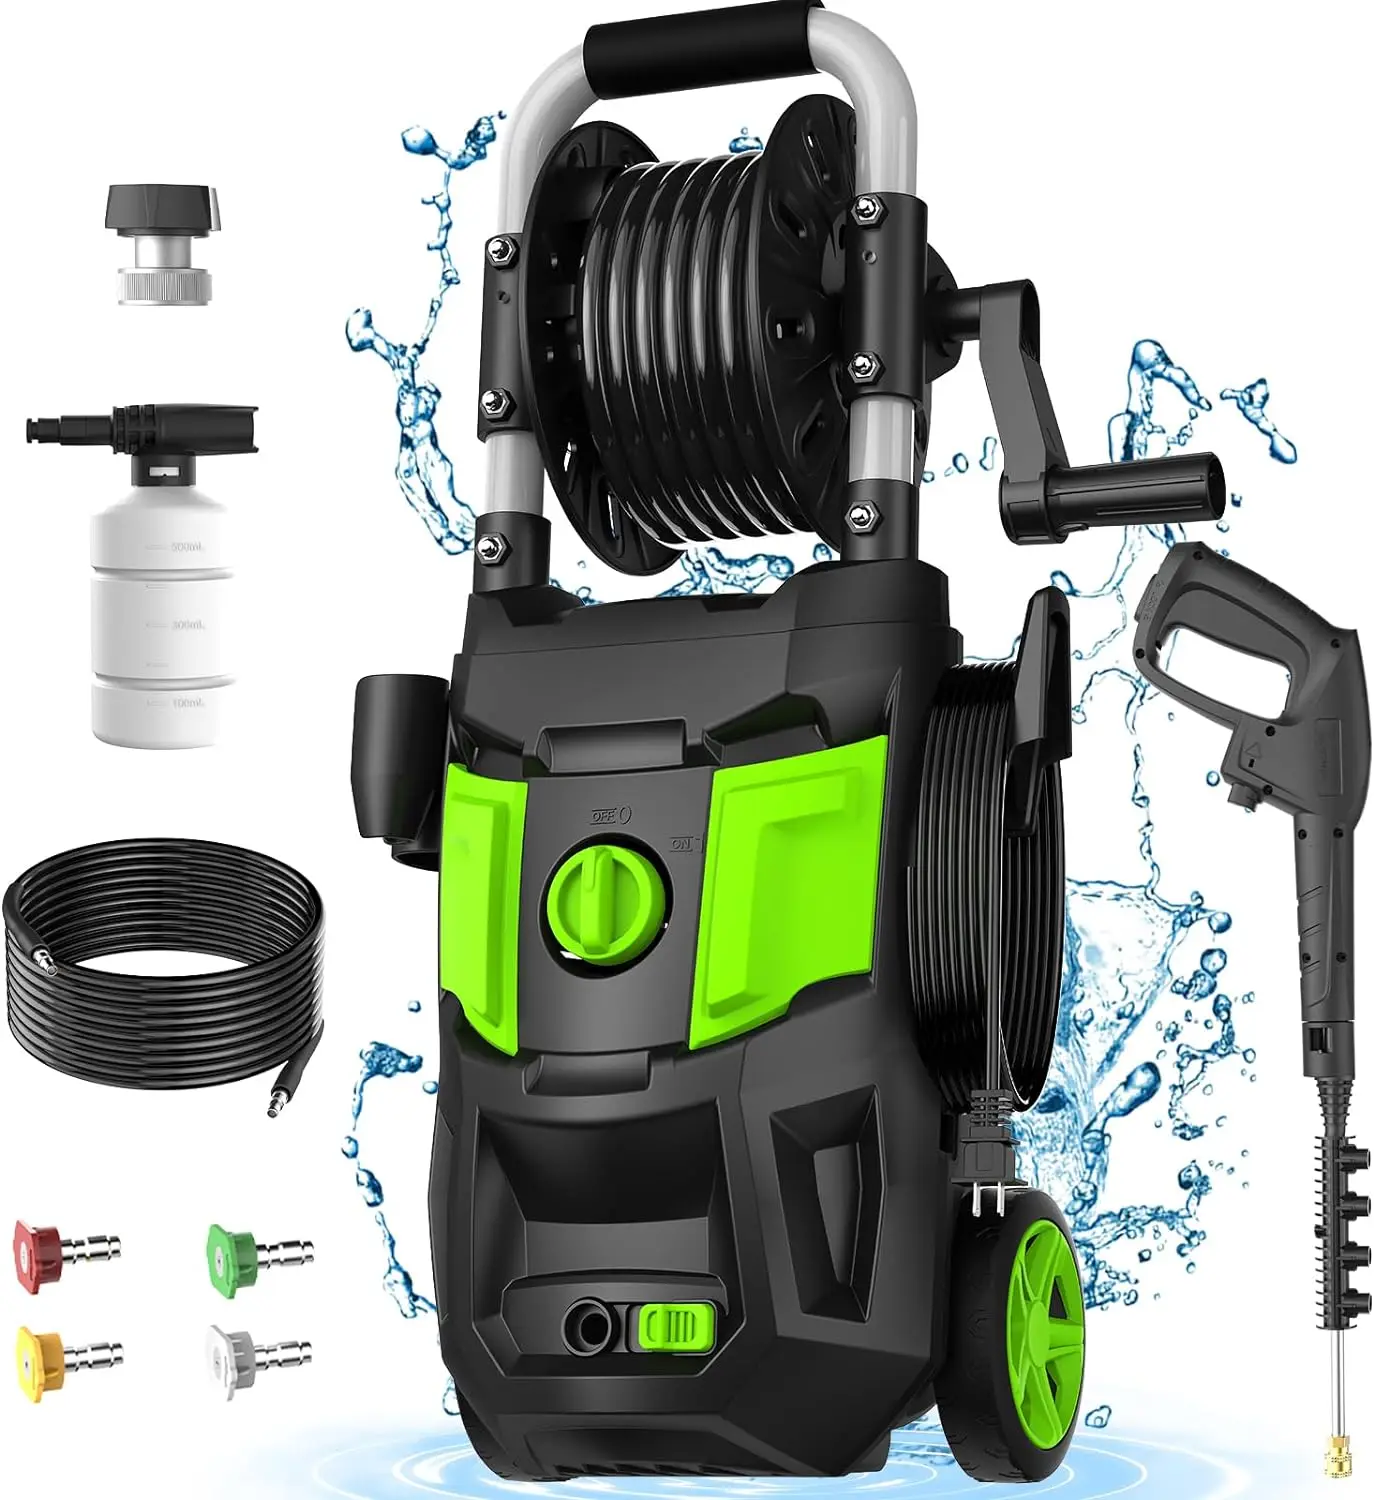 

Electric Pressure Washer,4200PSI Max 2.8 GPM Power Washer with 20FT Hose,35FT Power Cord,4 Nozzles,Foam Cannon Spray Gun